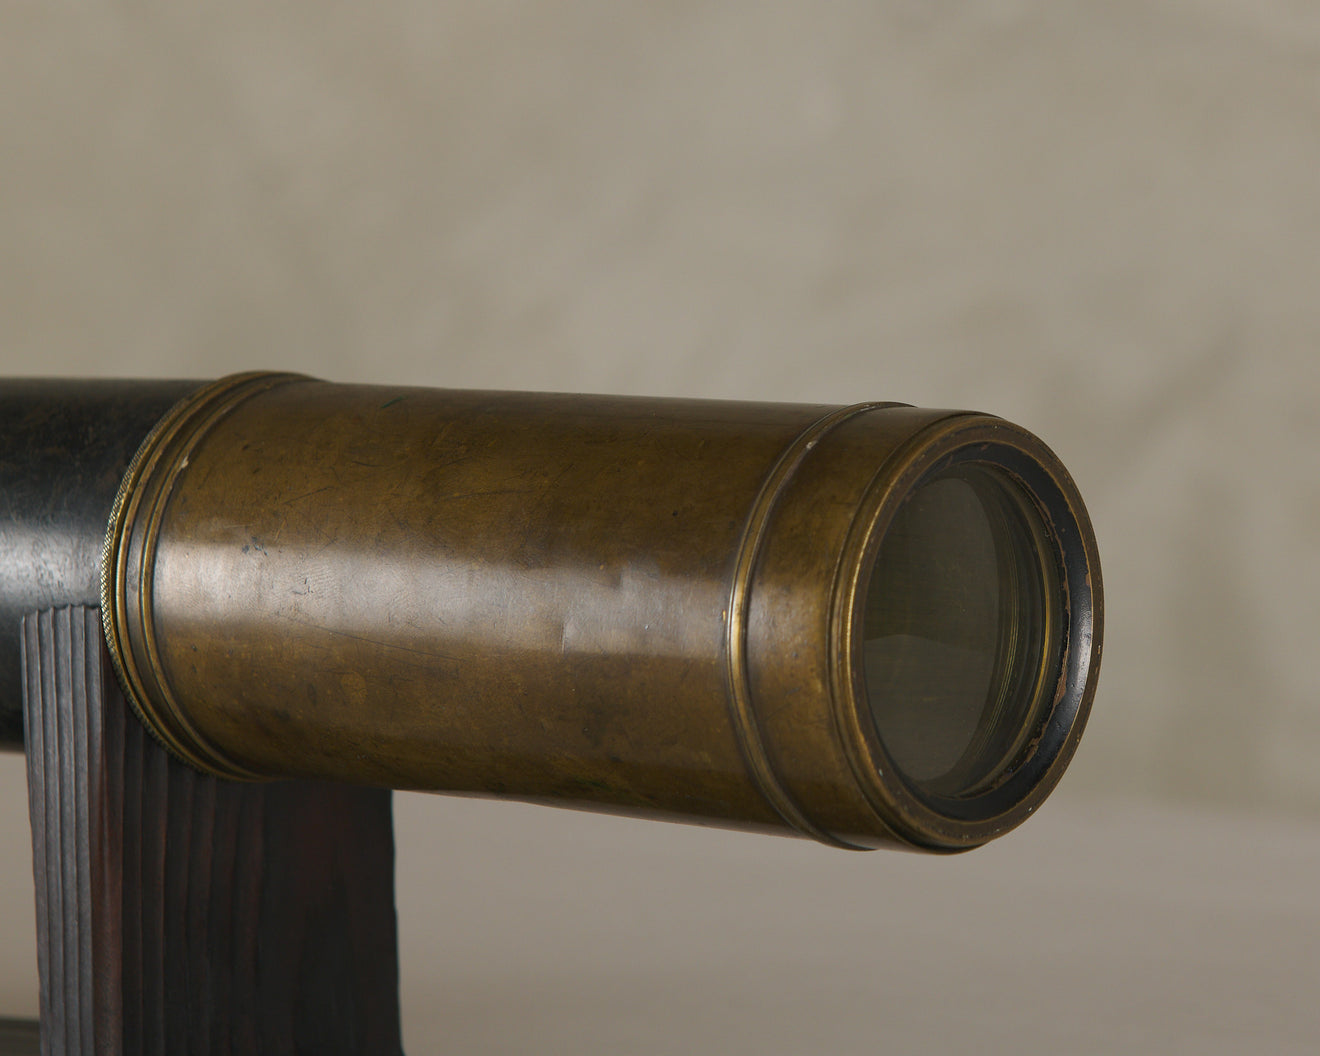 ENGLISH TELESCOPE ON STAND WITH SEVERAL INTERNAL LENSES